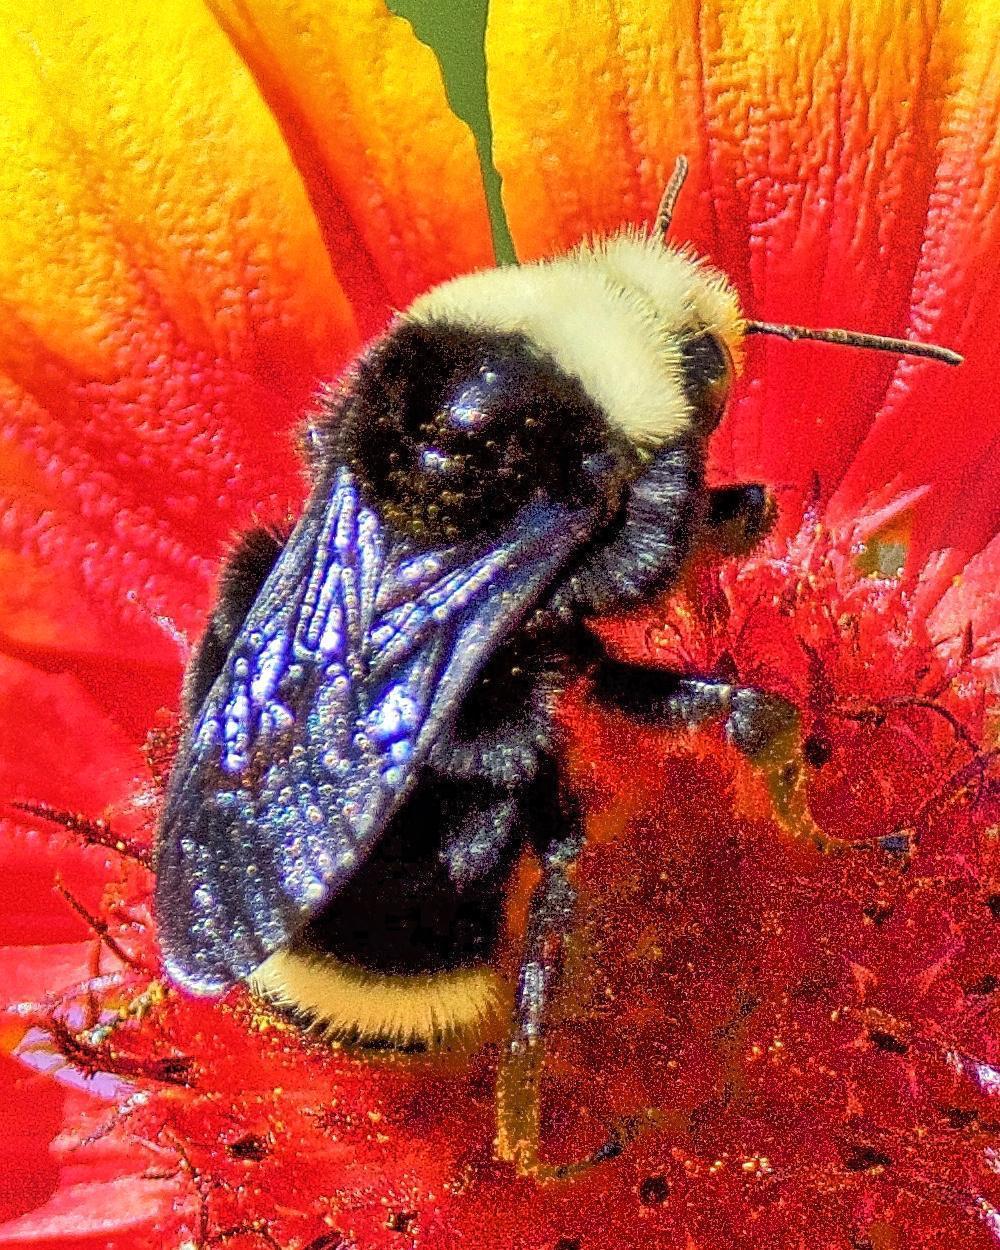 Yellow-faced bumble bee Photo by Brian Avent